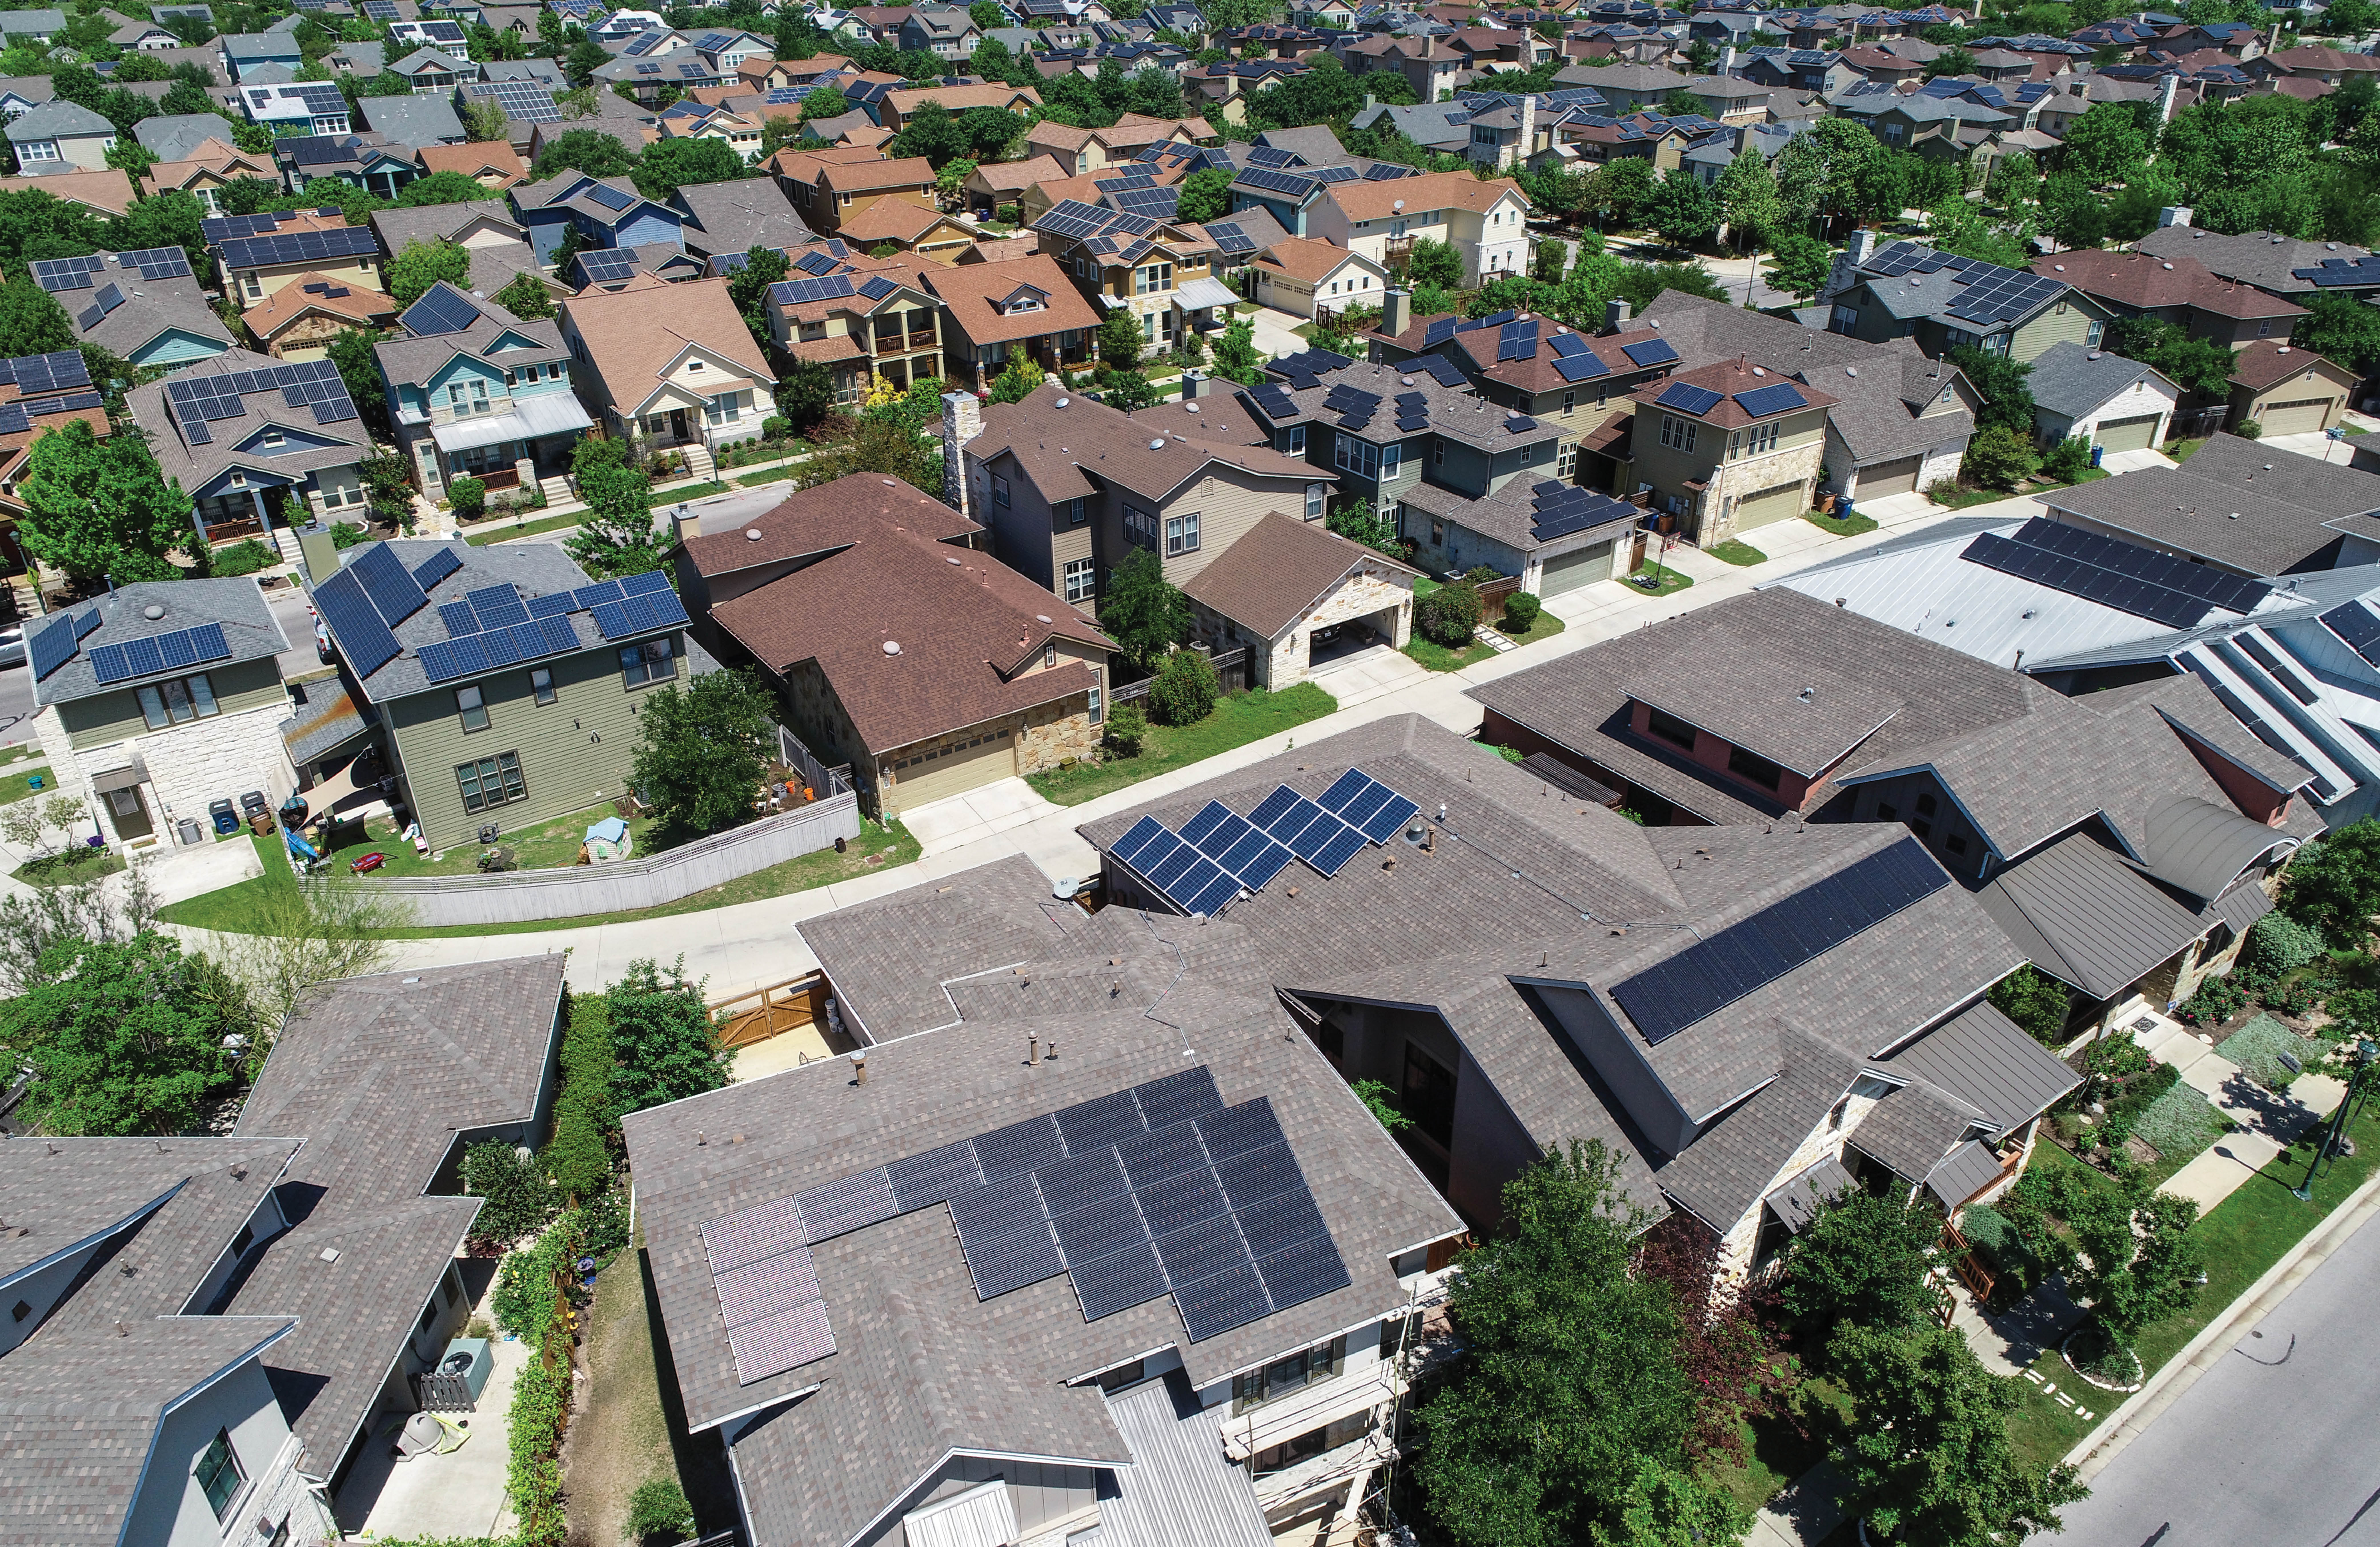 What You Should Know Before Installing Solar Panels or Buying a Solar-Powered Home 